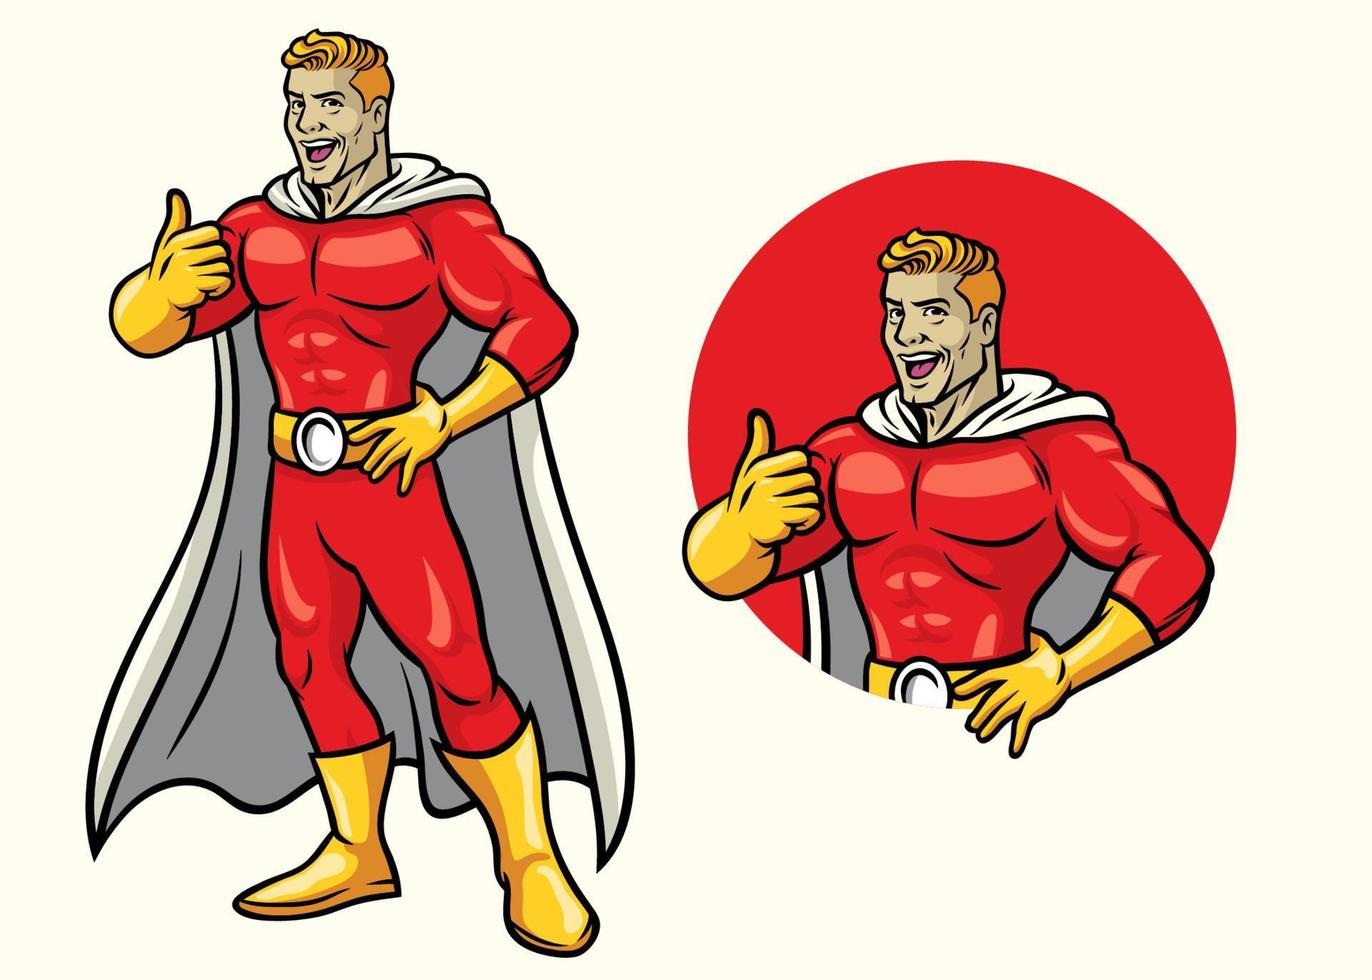 Superhero smiling with thumb up in set vector